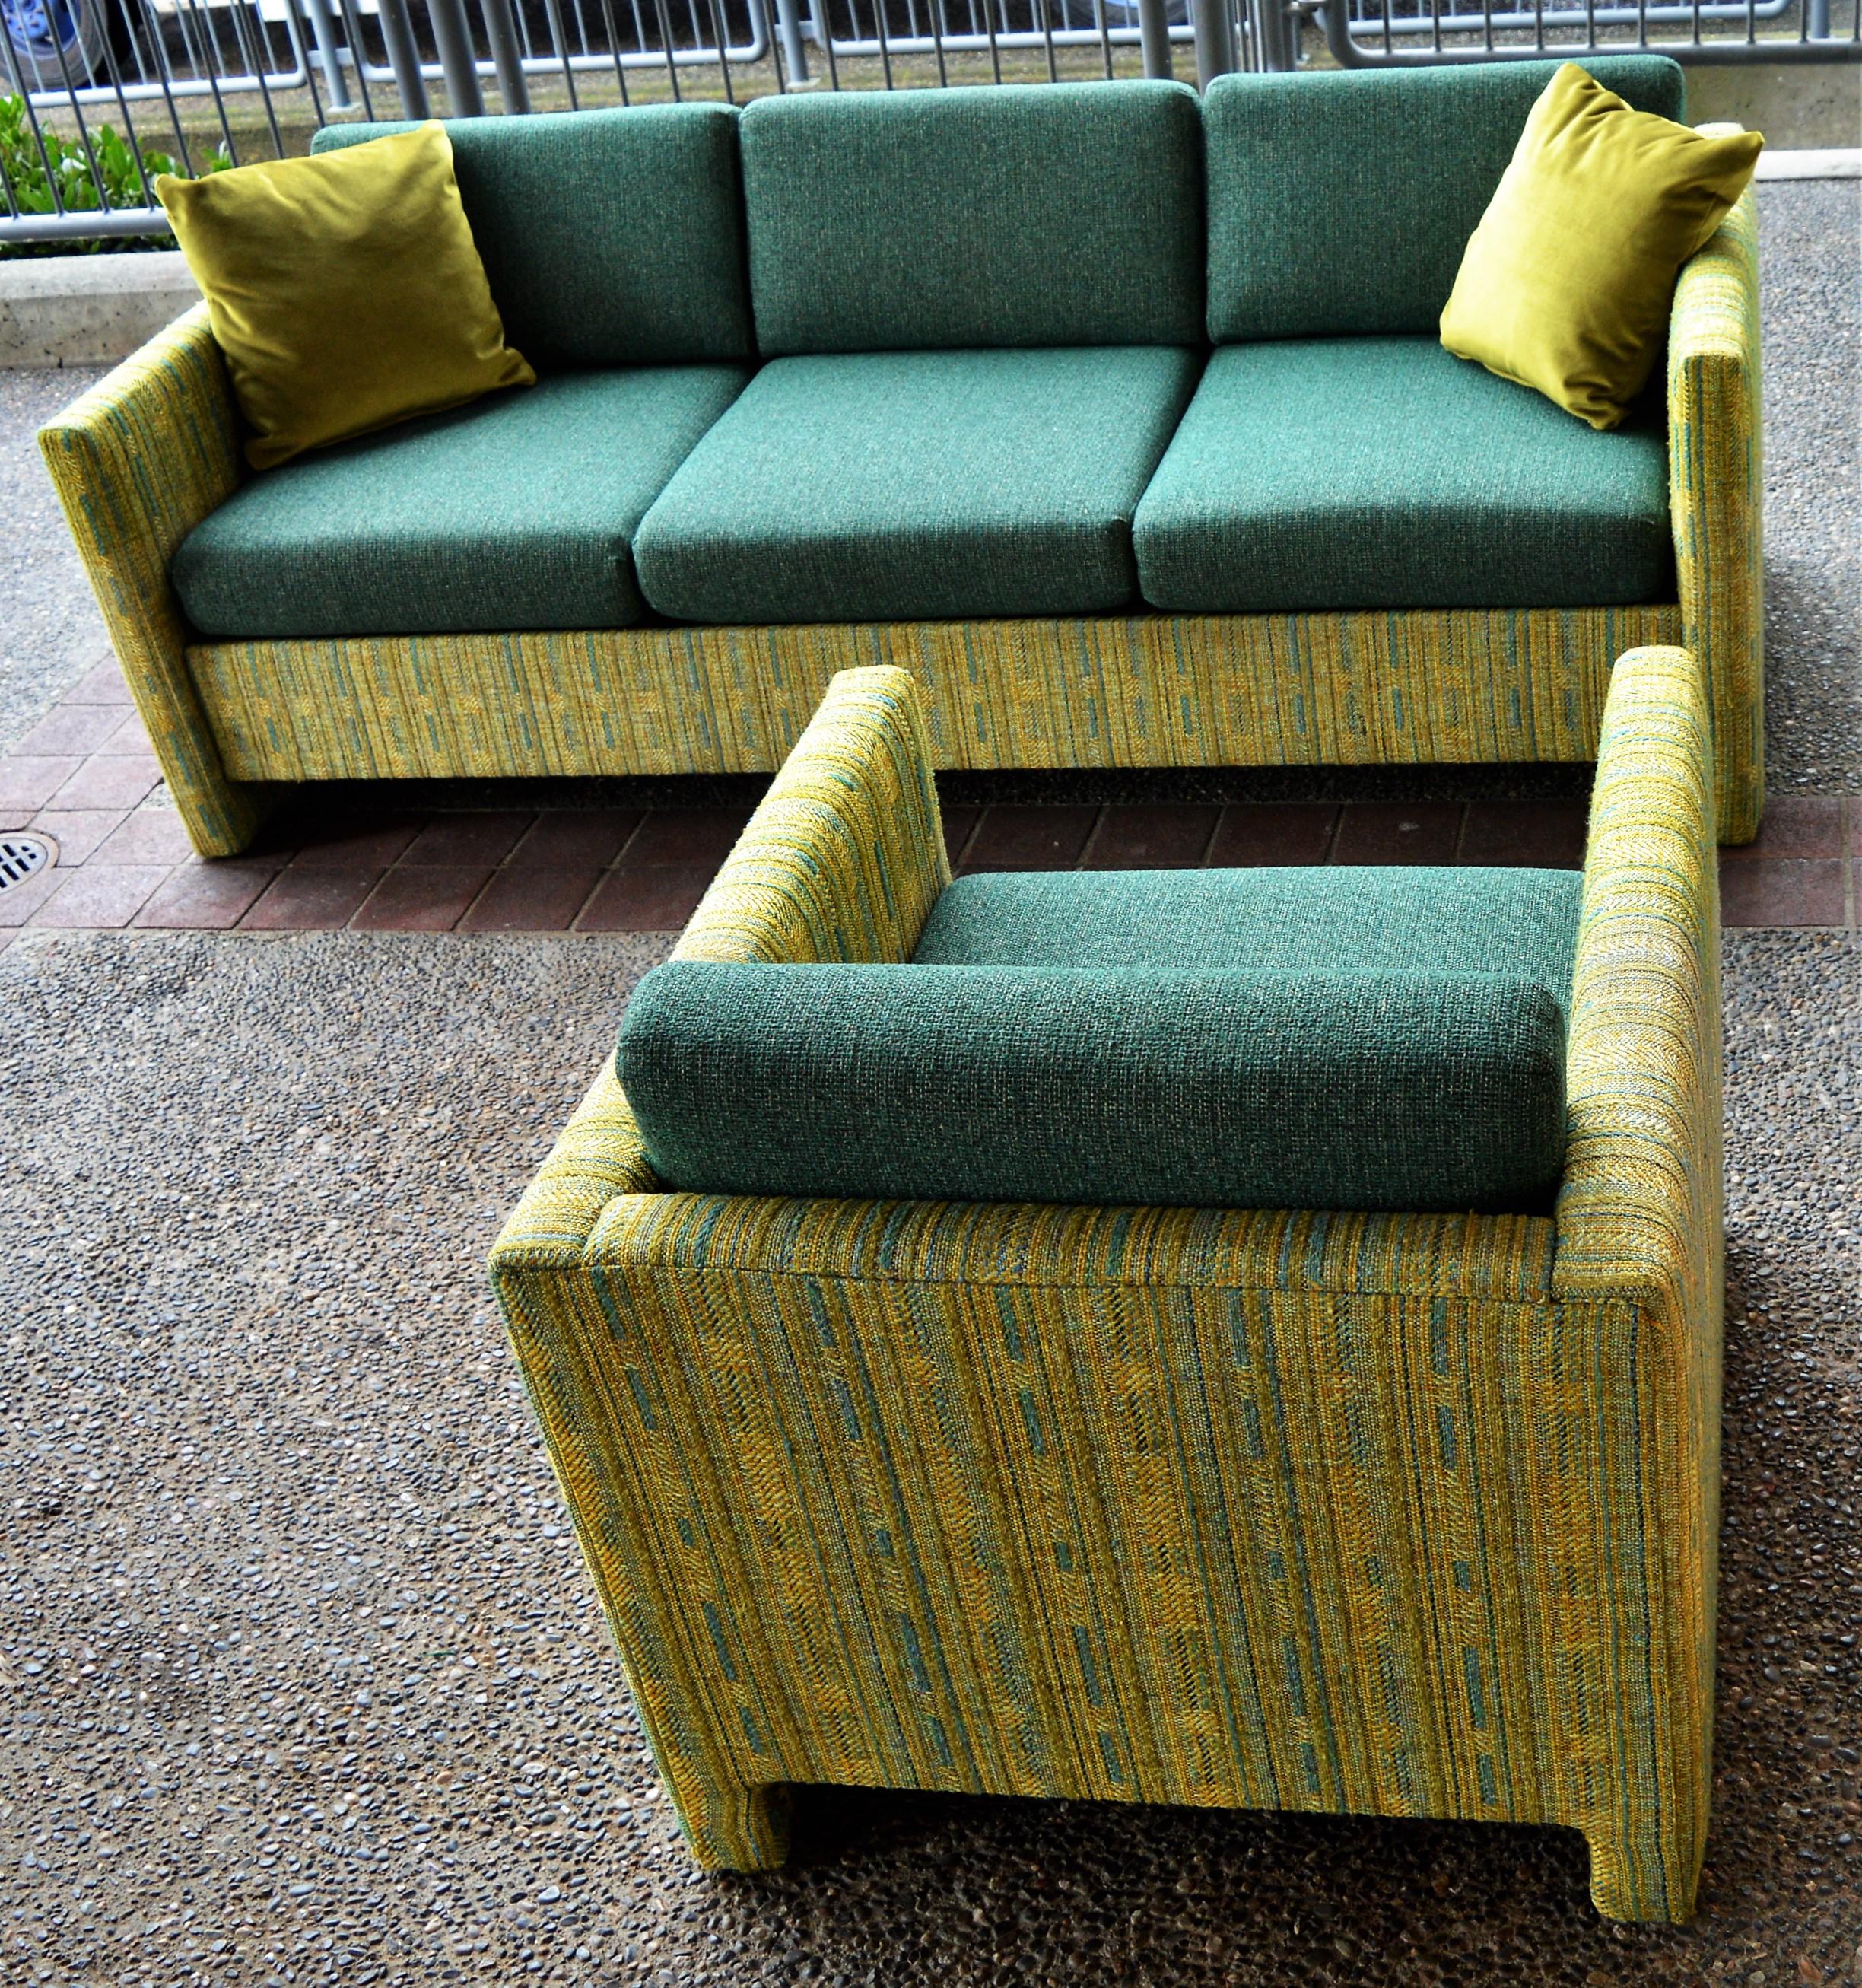 Midcentury Sofa and Club Chair in Teal Wool Cushions with Contrasting Print (Stoff)